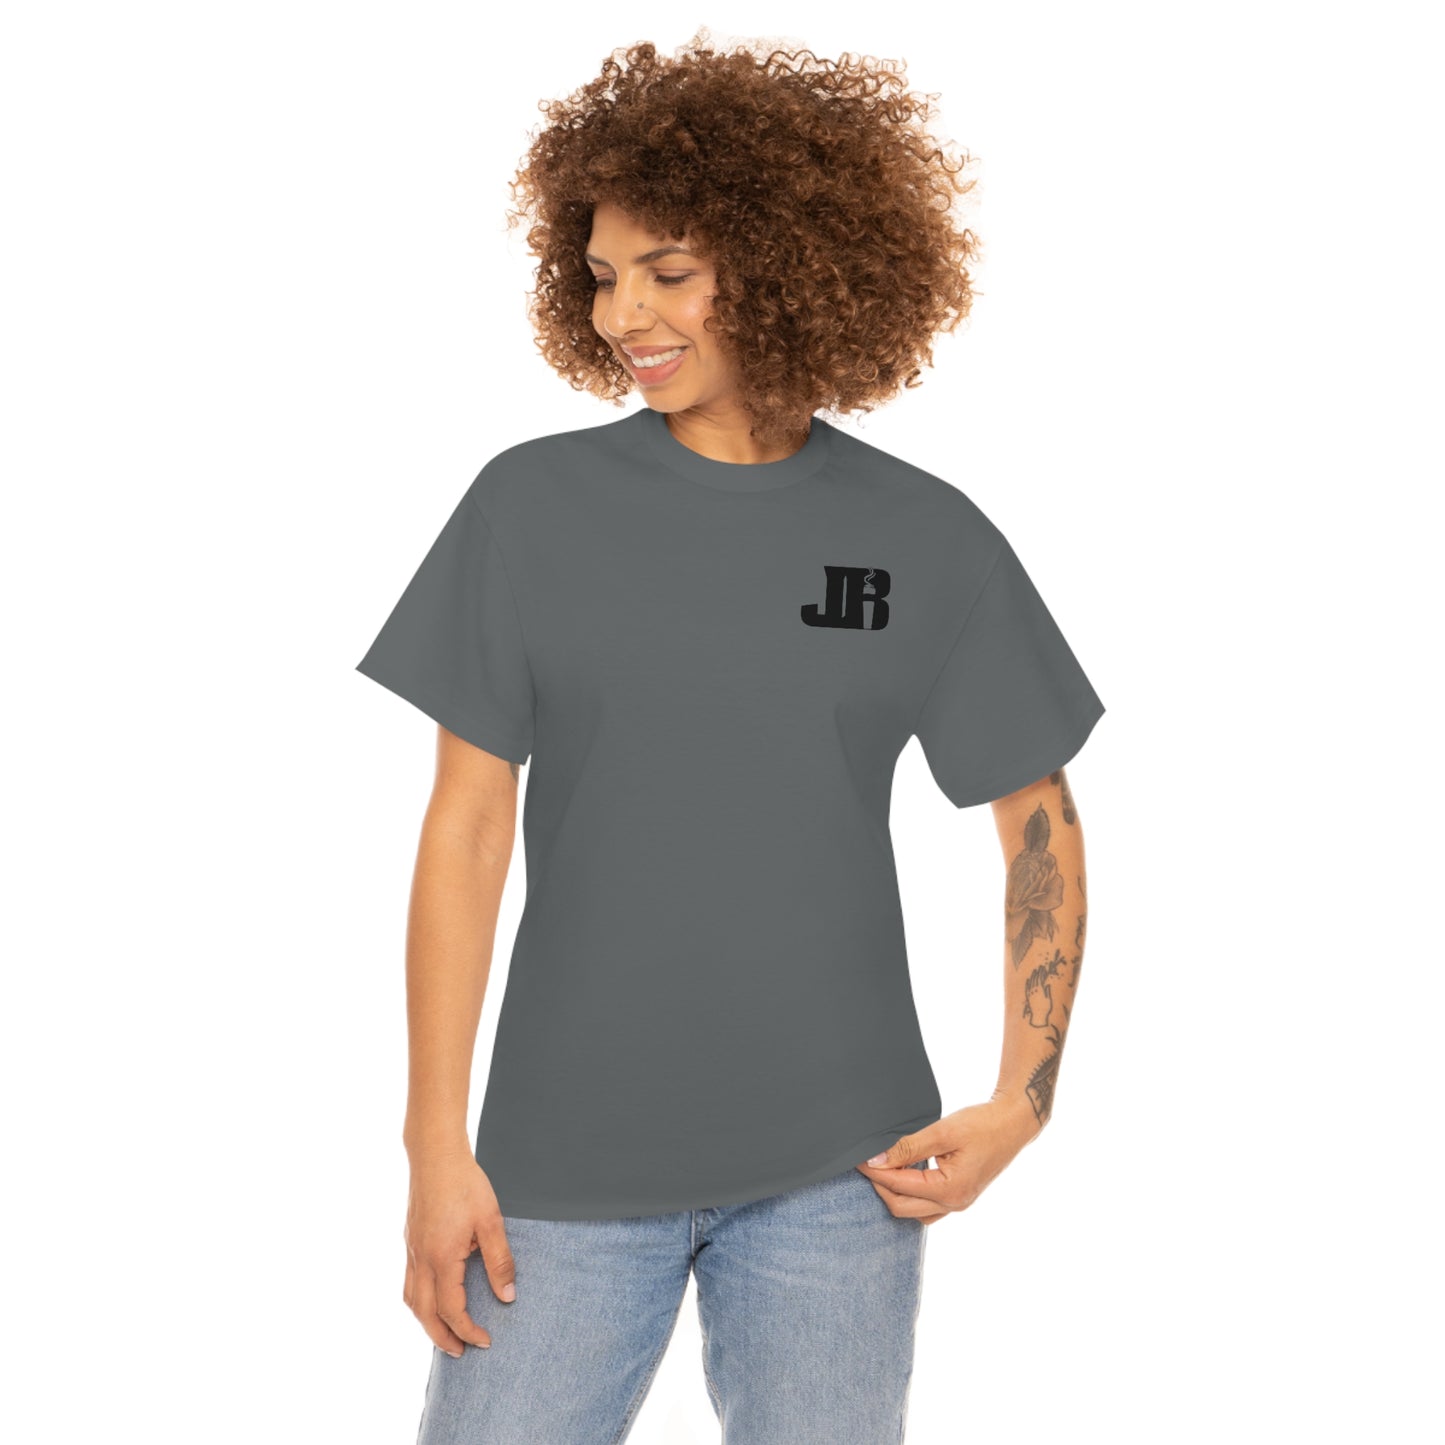 It's a Great Day to Have a Great Day Unisex Heavy Cotton Tee